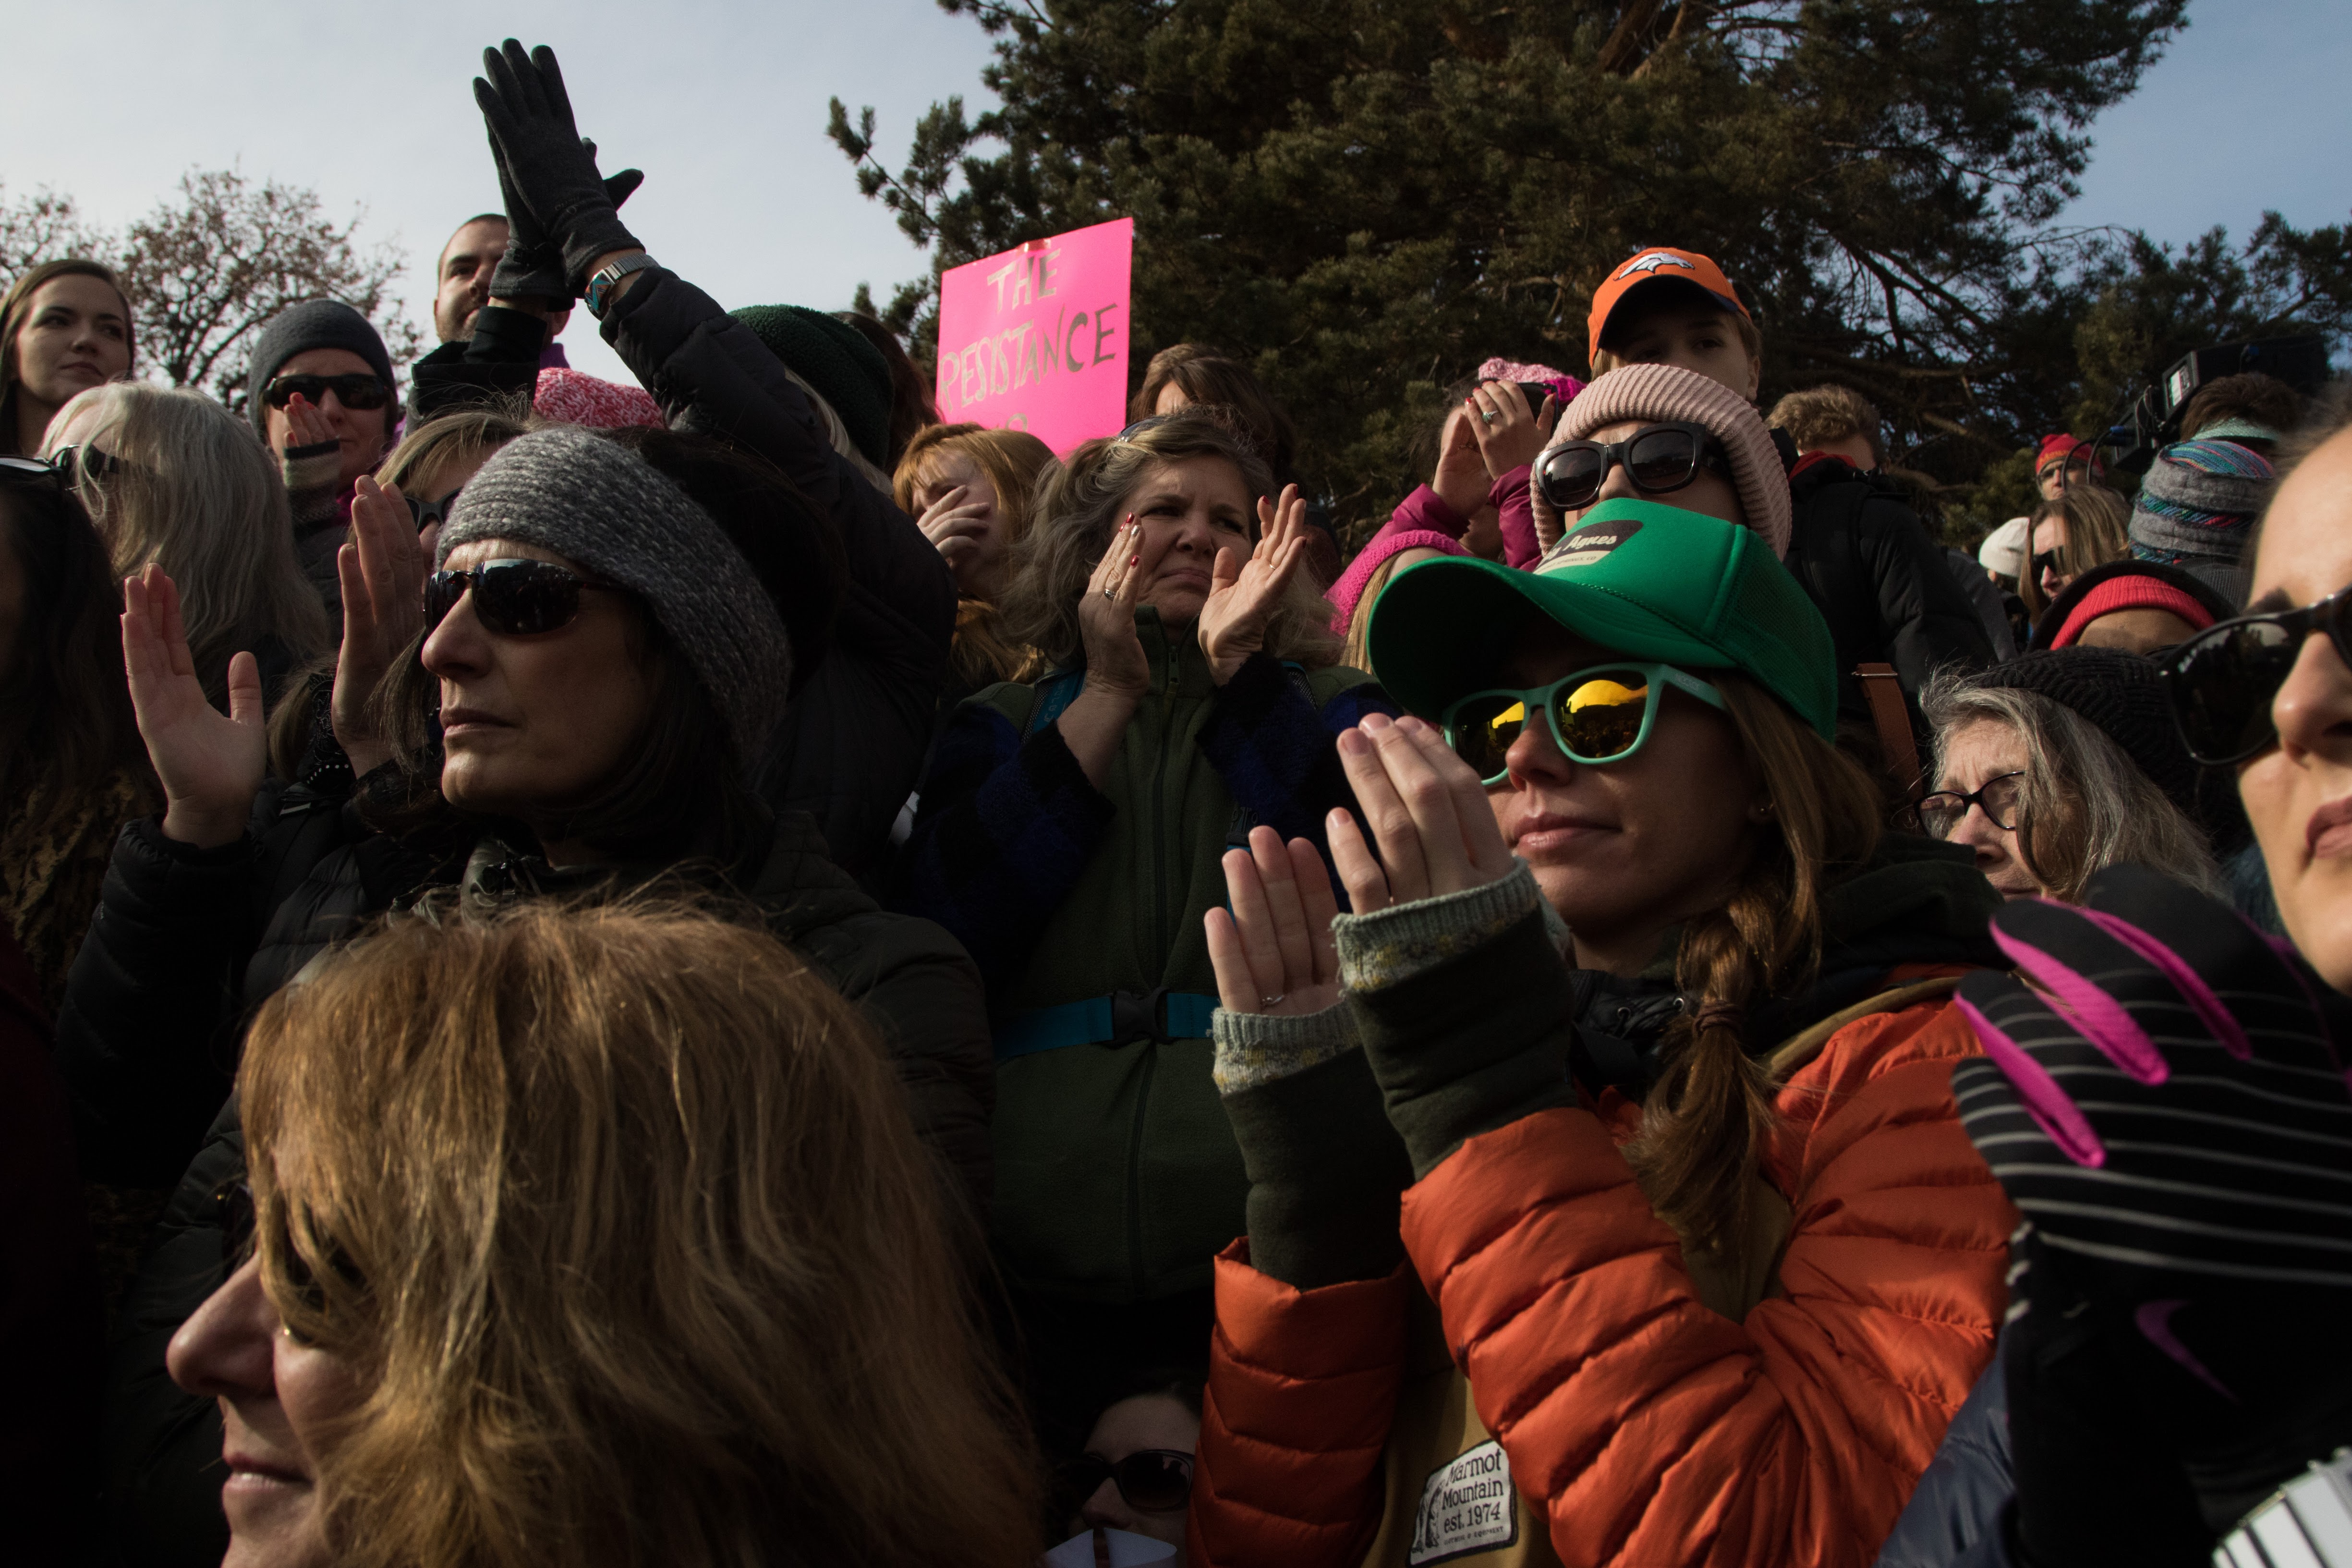 Women’s March on Denver, aimed at Trump administration, draws over 100,000